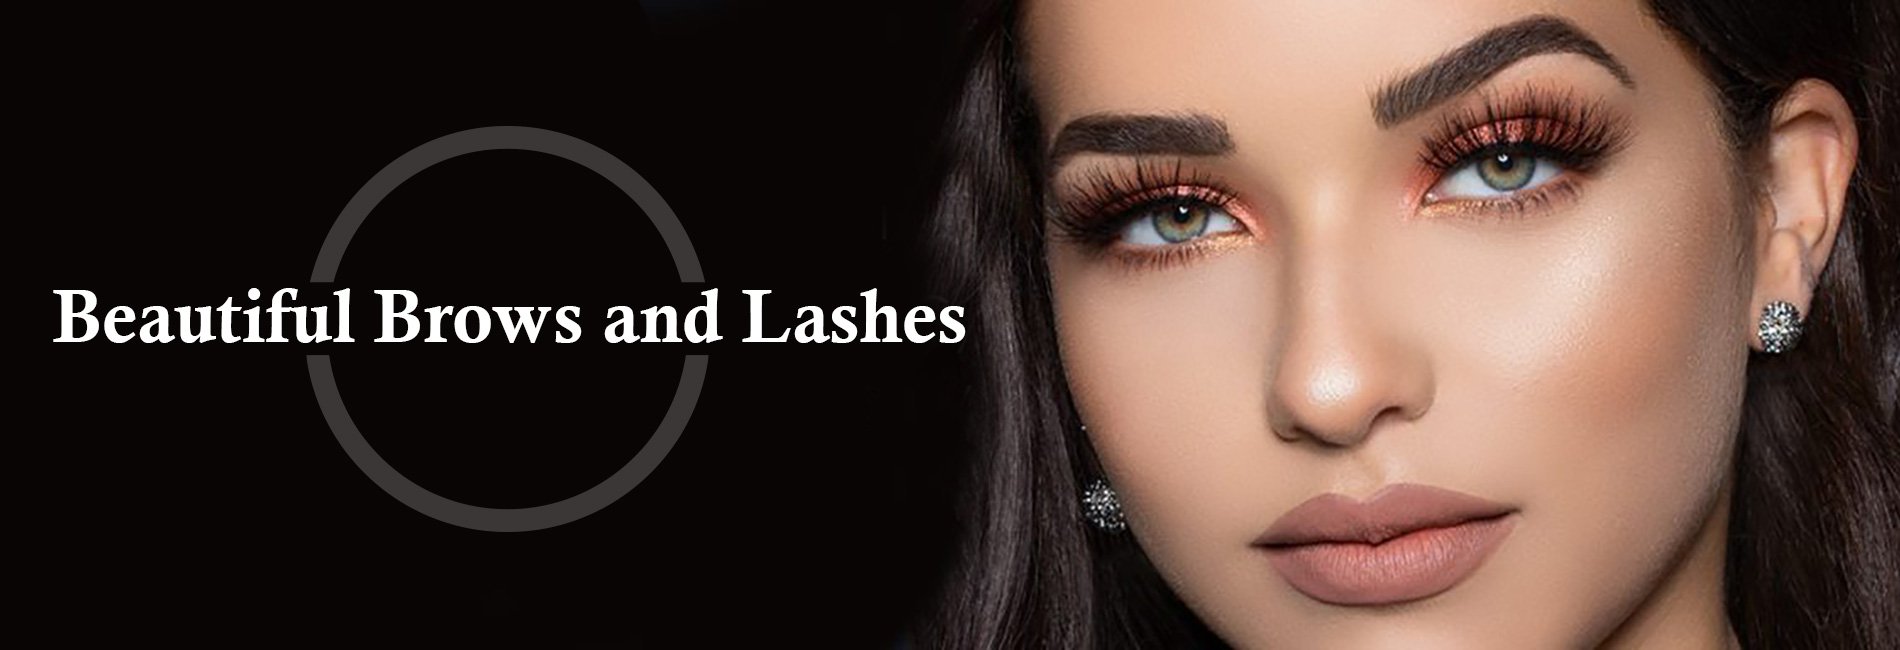 Beautiful Brows and Lashes 2